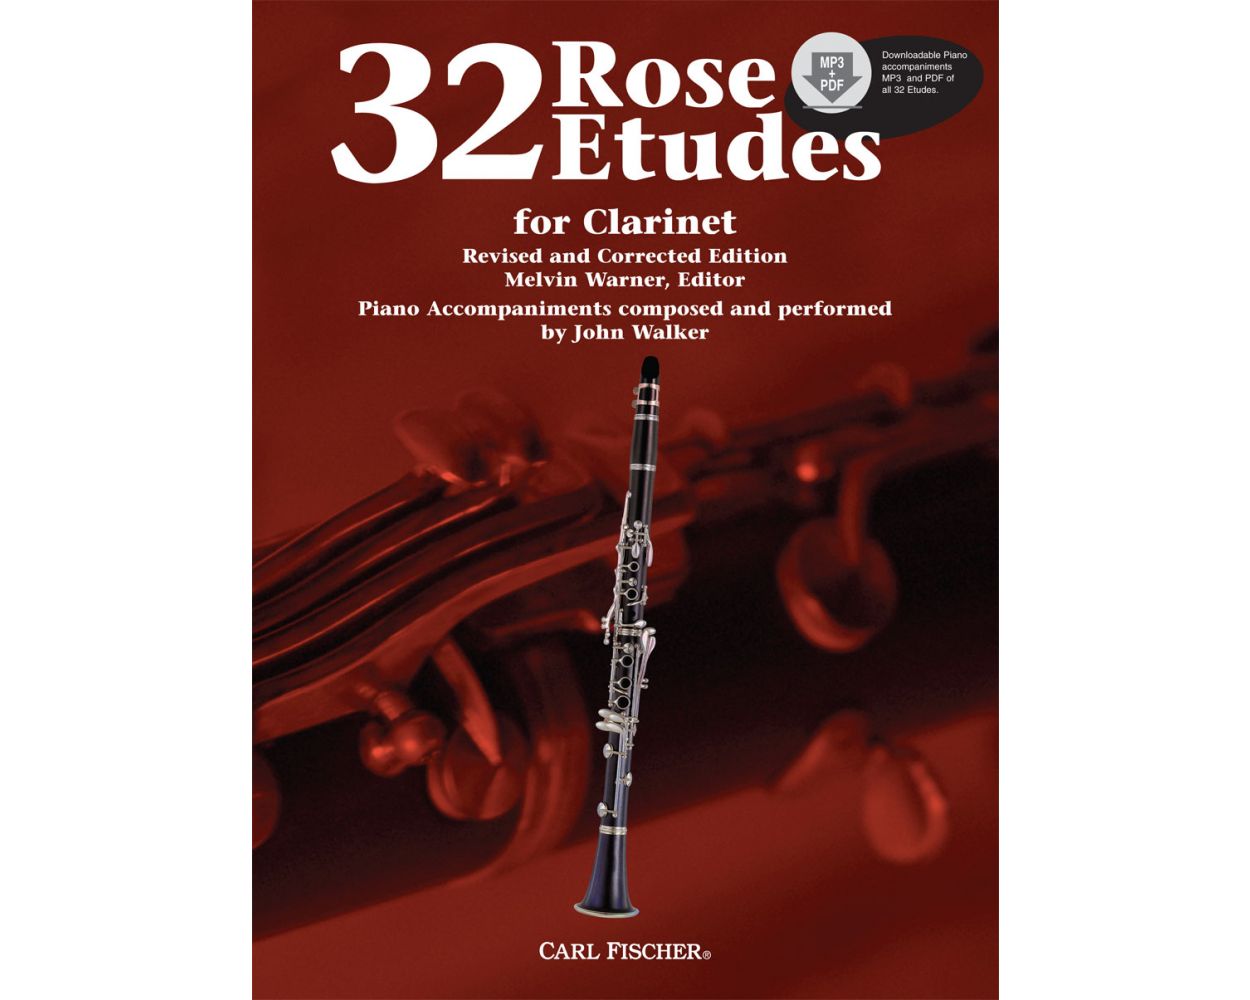 Rose 32 Etudes for Clarinet Revised and Corrected Edition